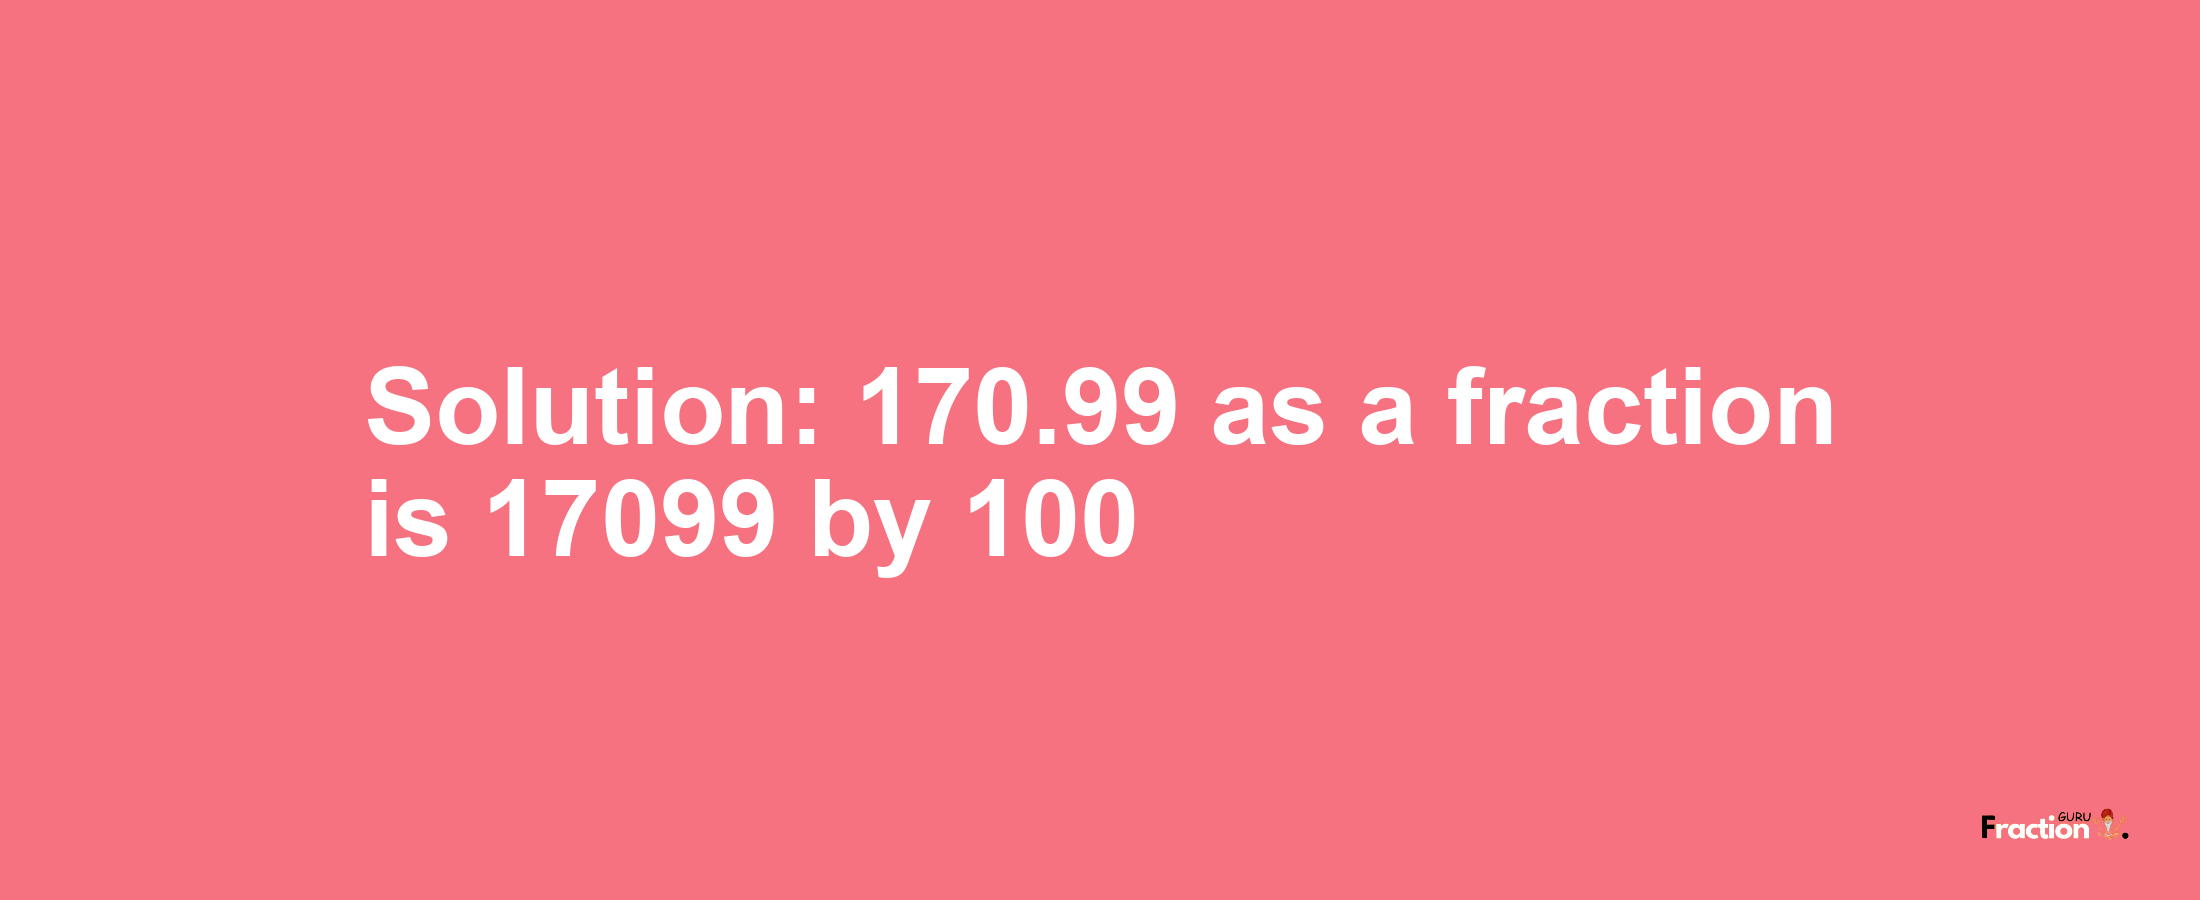 Solution:170.99 as a fraction is 17099/100